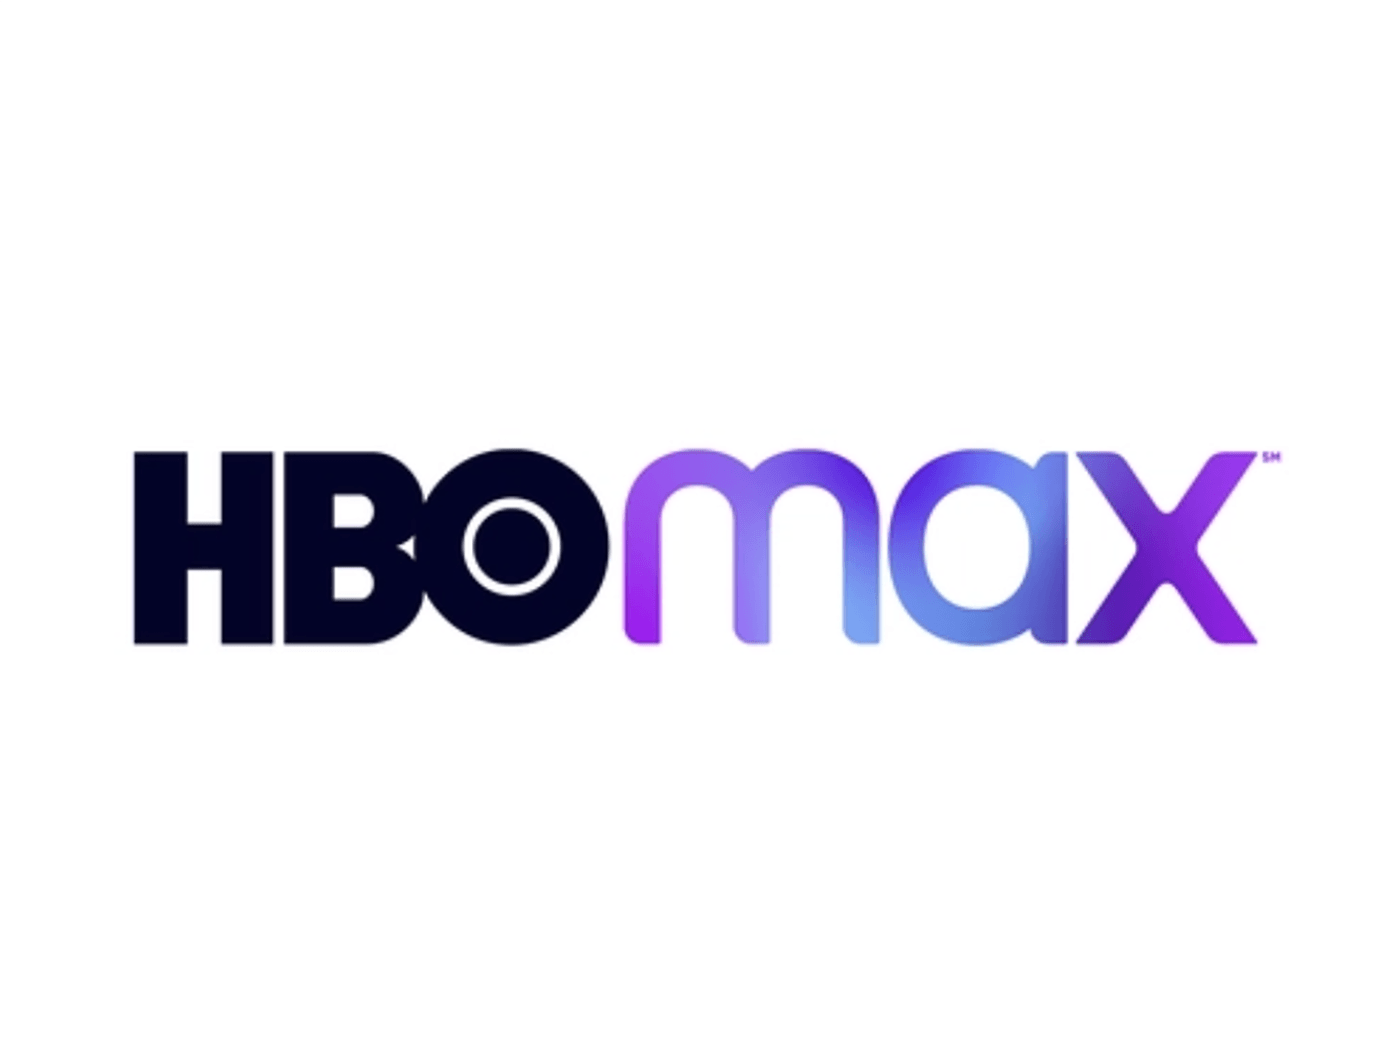 TNT, TBS, and truTV Will Air HBO Max Shows This Thanksgiving Weekend